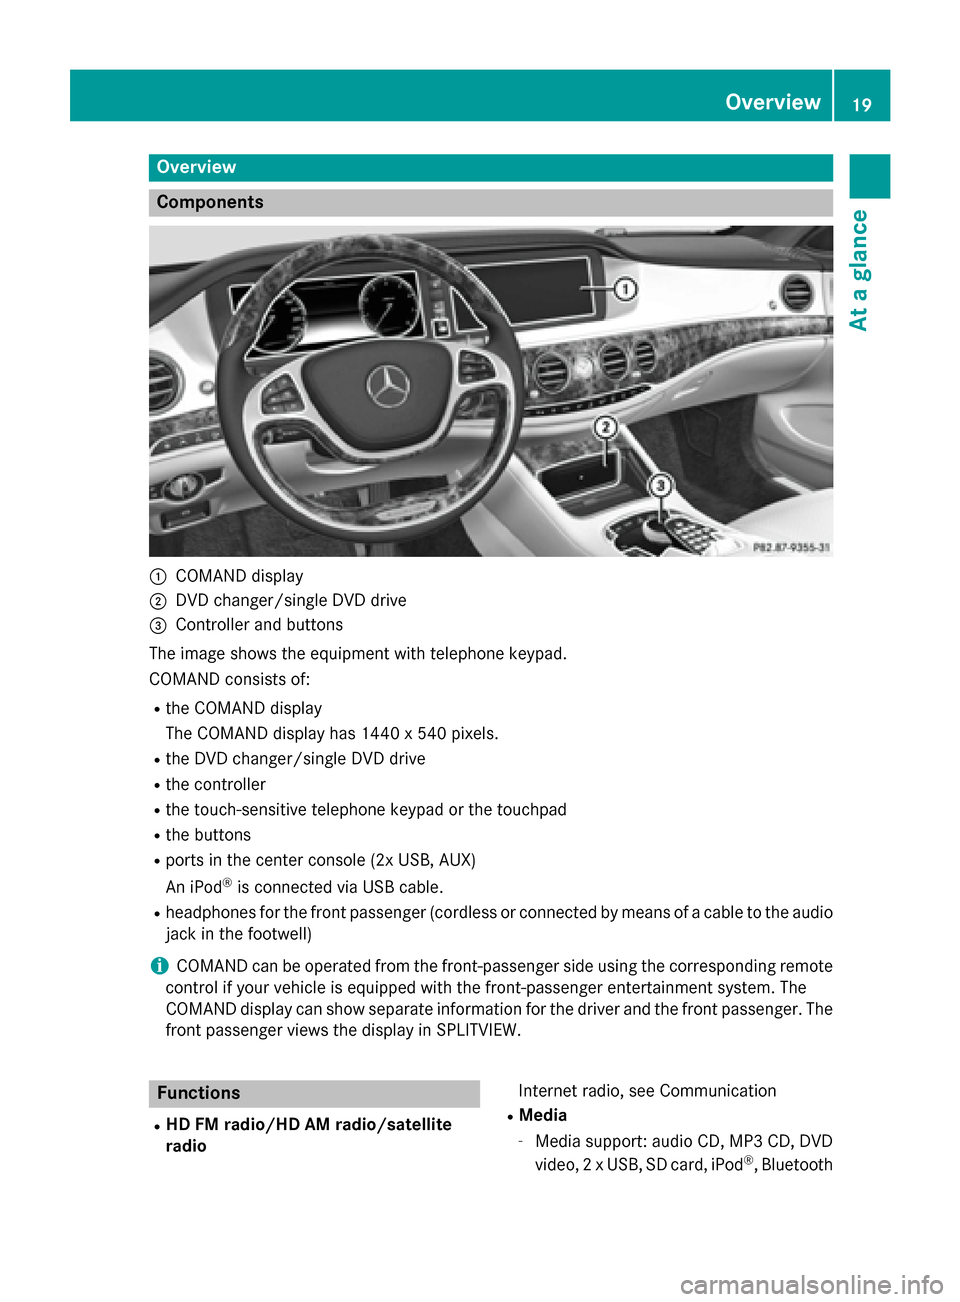 MERCEDES-BENZ S-Class 2015 W222 Comand Manual Overview
Components
0043
COMAND display
0044 DVD changer/single DVD drive
0087 Controller and buttons
The image shows the equipment with telephone keypad.
COMAND consists of:
R the COMAND display
The 